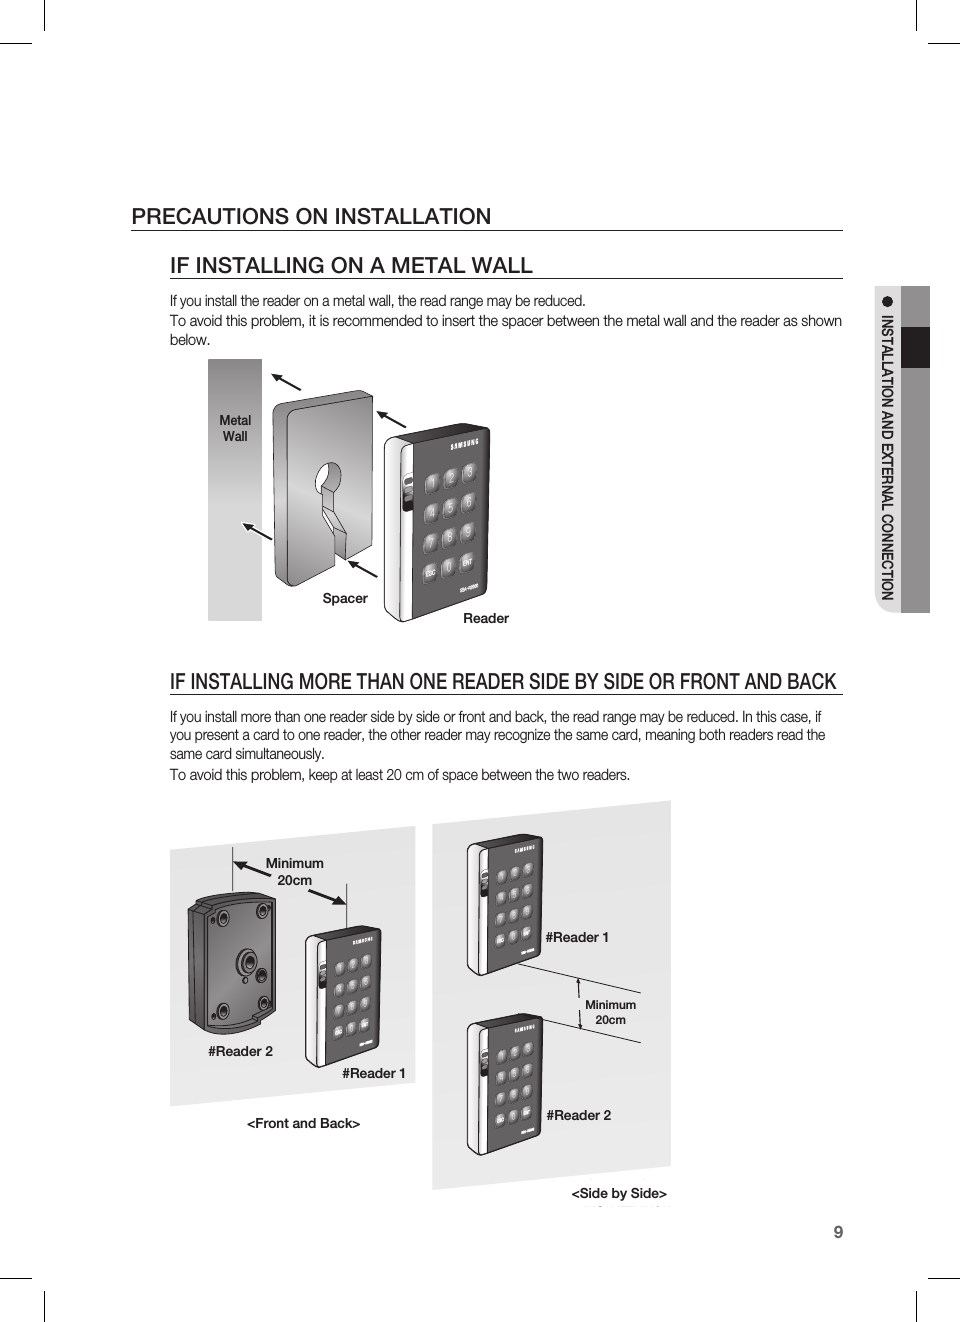 English9INSTALLATION AND EXTERNAL CONNECTIONPRECAUTIONS ON INSTALLATIONIF INSTALLING ON A METAL WALLIf you install the reader on a metal wall, the read range may be reduced.To avoid this problem, it is recommended to insert the spacer between the metal wall and the reader as shown below.IF INSTALLING MORE THAN ONE READER SIDE BY SIDE OR FRONT AND BACKIf you install more than one reader side by side or front and back, the read range may be reduced. In this case, if you present a card to one reader, the other reader may recognize the same card, meaning both readers read the same card simultaneously.To avoid this problem, keep at least 20 cm of space between the two readers.zzhTyYWWWXYZ[\]^_`lzj lu{WSpacerReaderMetal WallBACK TO BACKINSTALLATIONSIDE BY SIDEINSTALLATIONzzhTyYWWWXYZ[\]^_`lzj lu{WzzhTyYWWWXYZ[\]^_`lzj lu{WzzhTyYWWWXYZ[\]^_`lzj lu{W&lt;Front and Back&gt;&lt;Side by Side&gt;Minimum 20cmMinimum 20cm#Reader 1#Reader 2#Reader 1#Reader 2